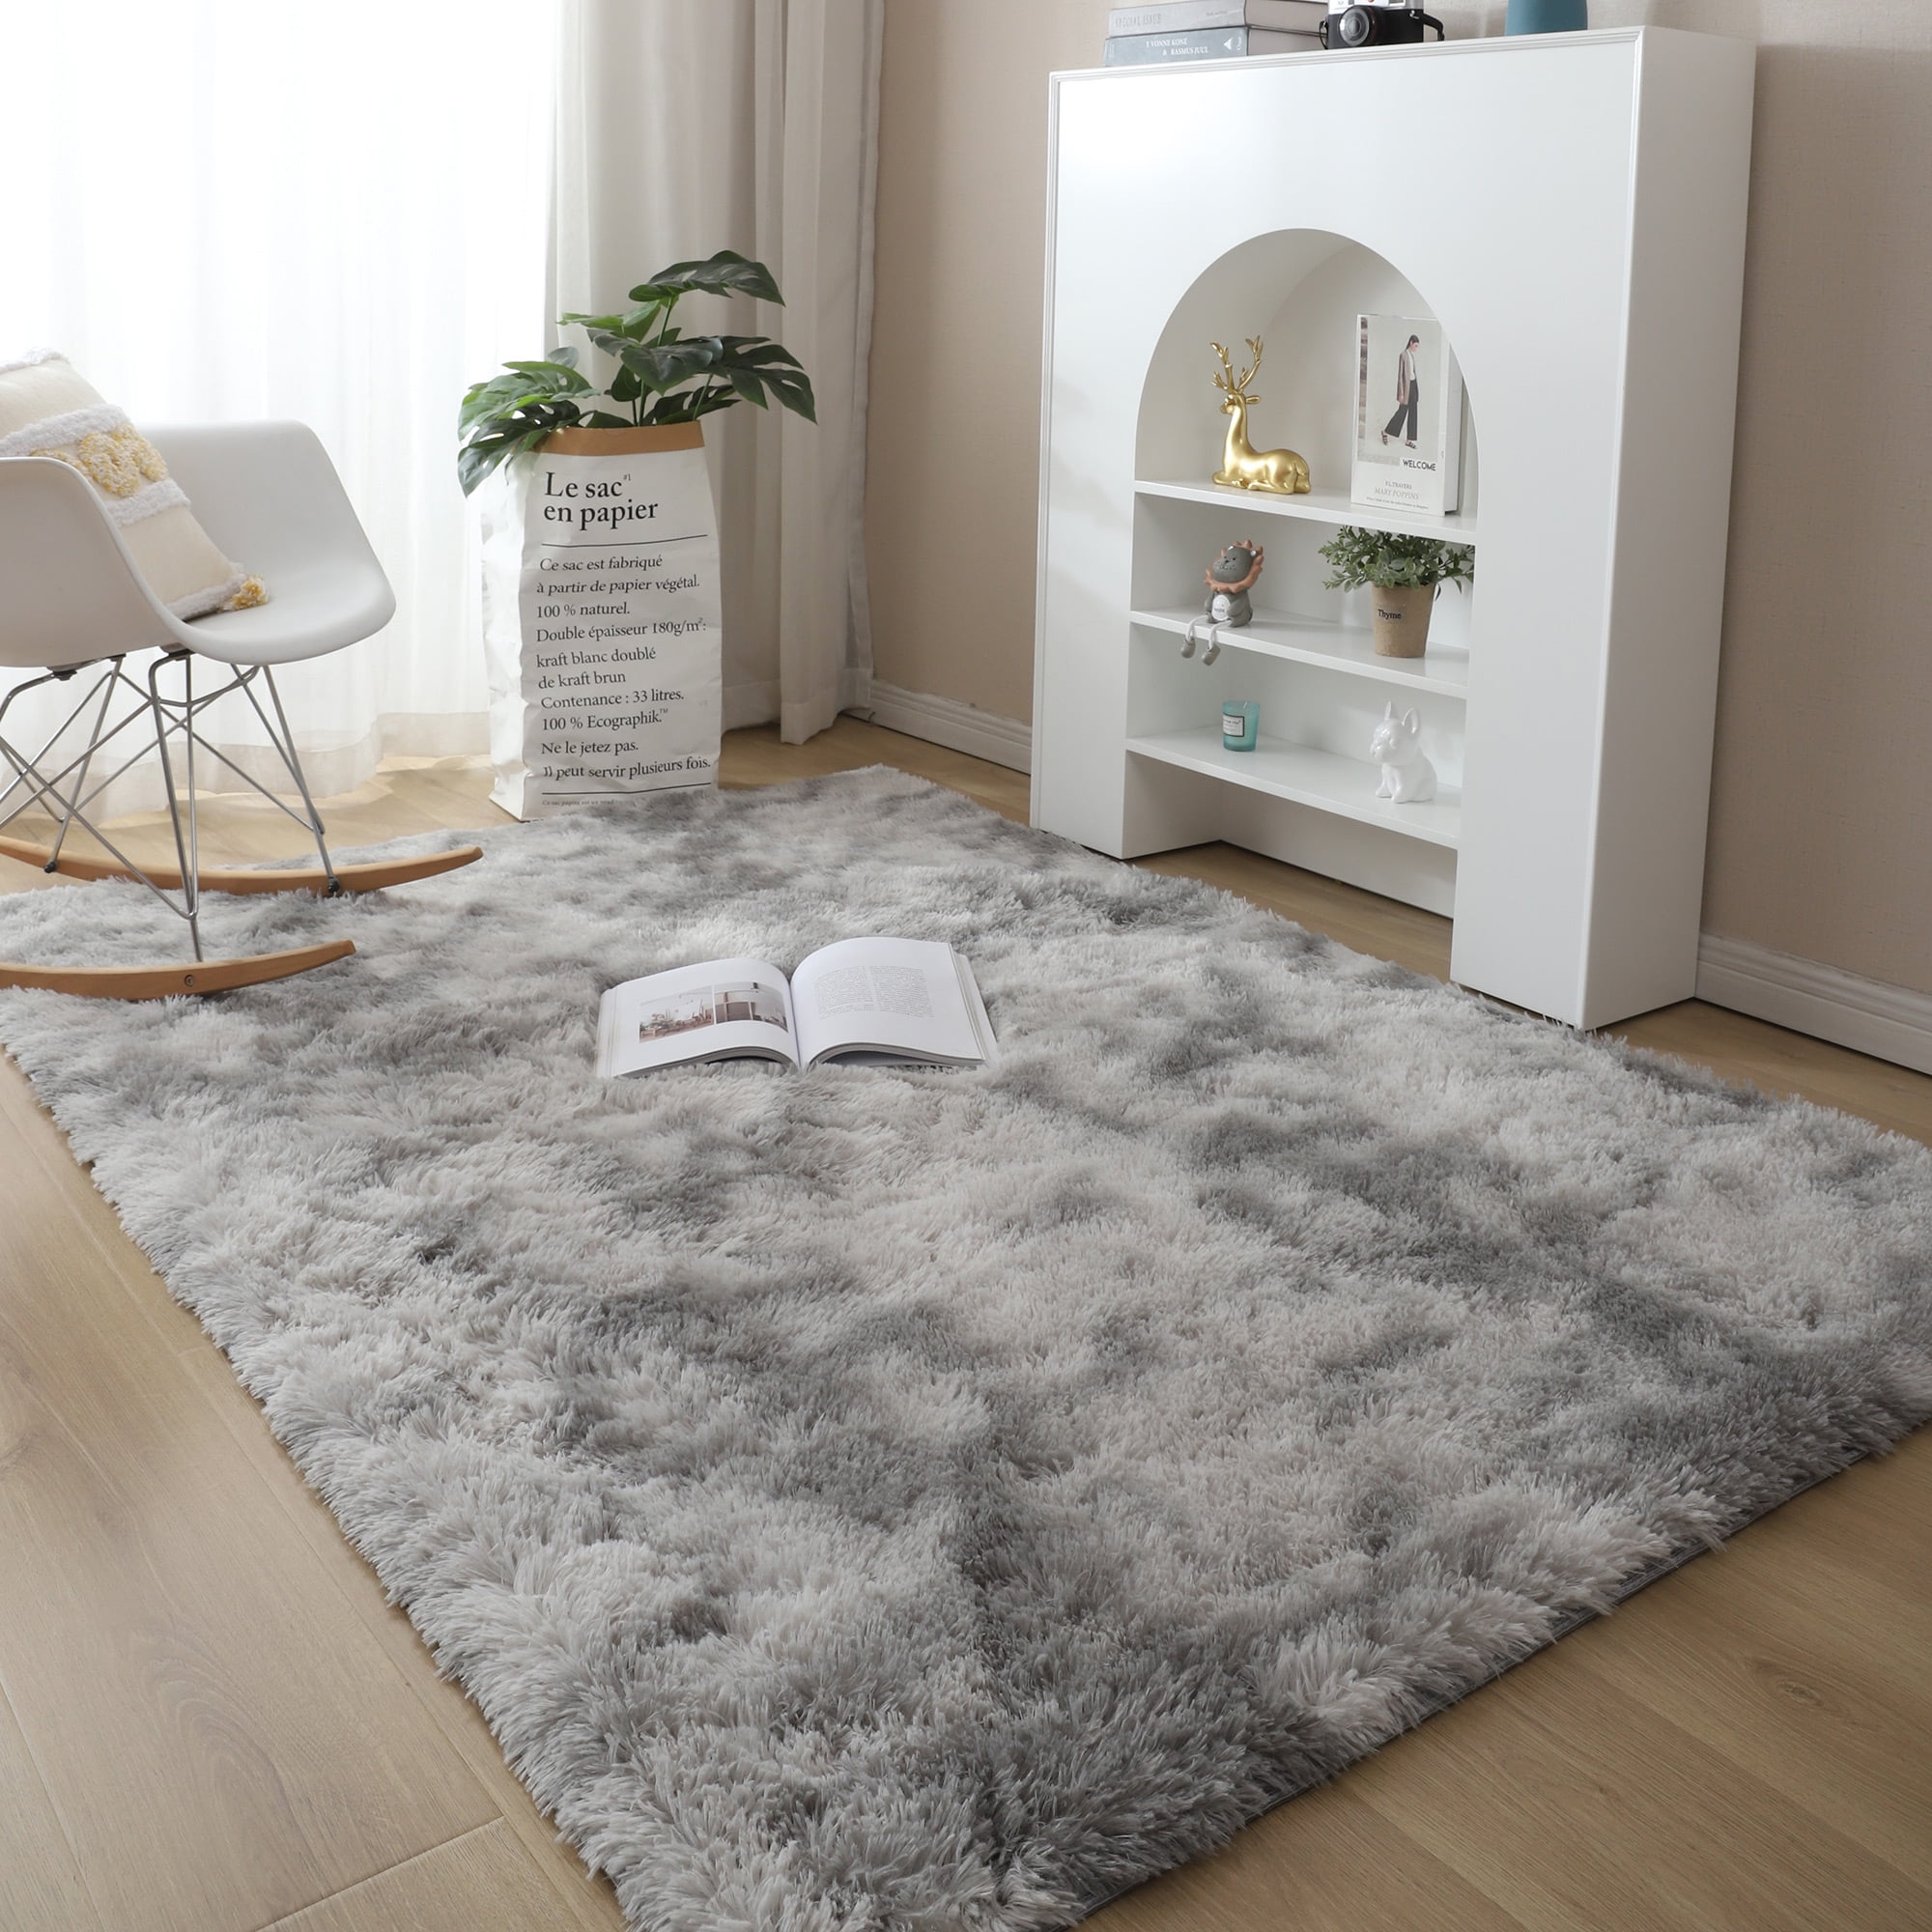 Soft Bedroom Area Rug Animal White Pet Kitten with Tooth and Headset Decorative Throw Rug for Indoor Floor Carpet，Non Slip Carpets Rugs for Living Room 4ft 